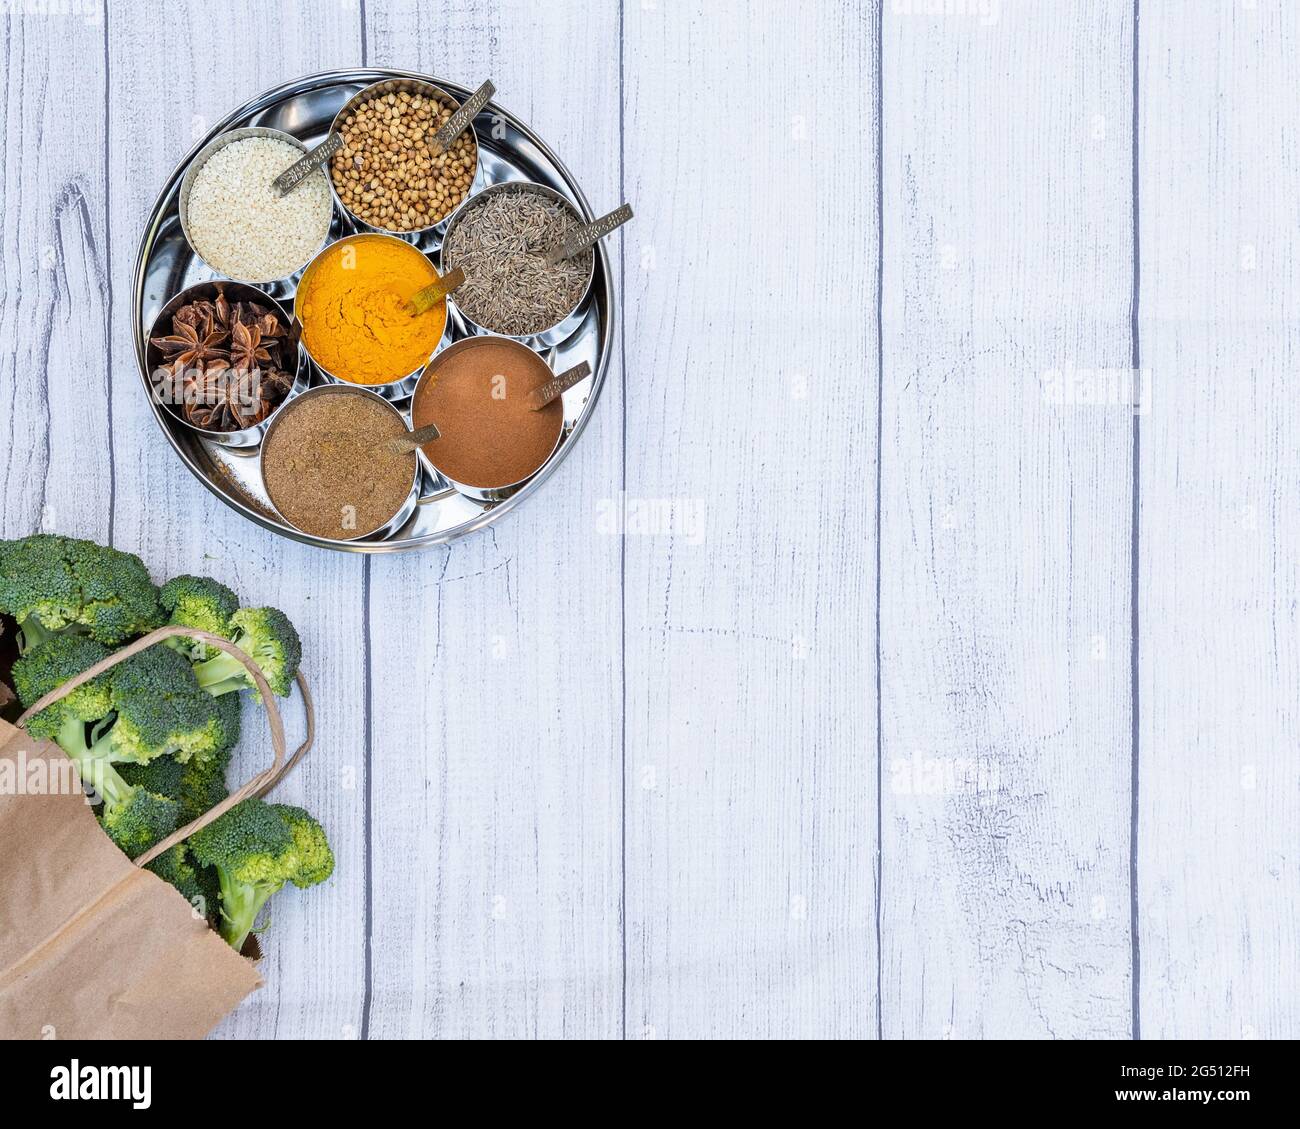 Flat lay of Indian spices with a bag of broccoli and room for copy. Stock Photo